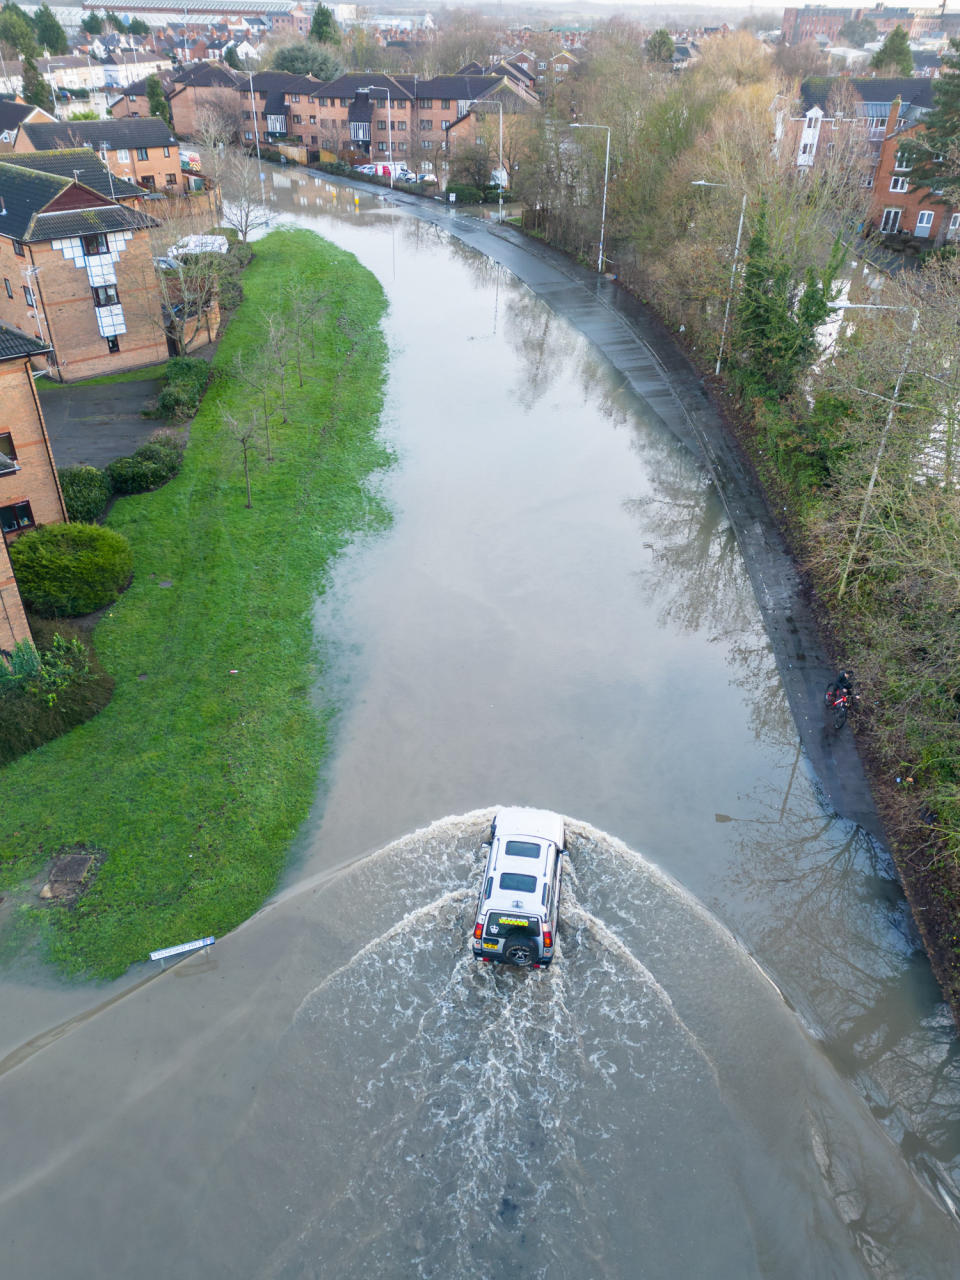 A vehicle makes its way through flooded roads in Loughborough, Leicestershire. (SWNS)